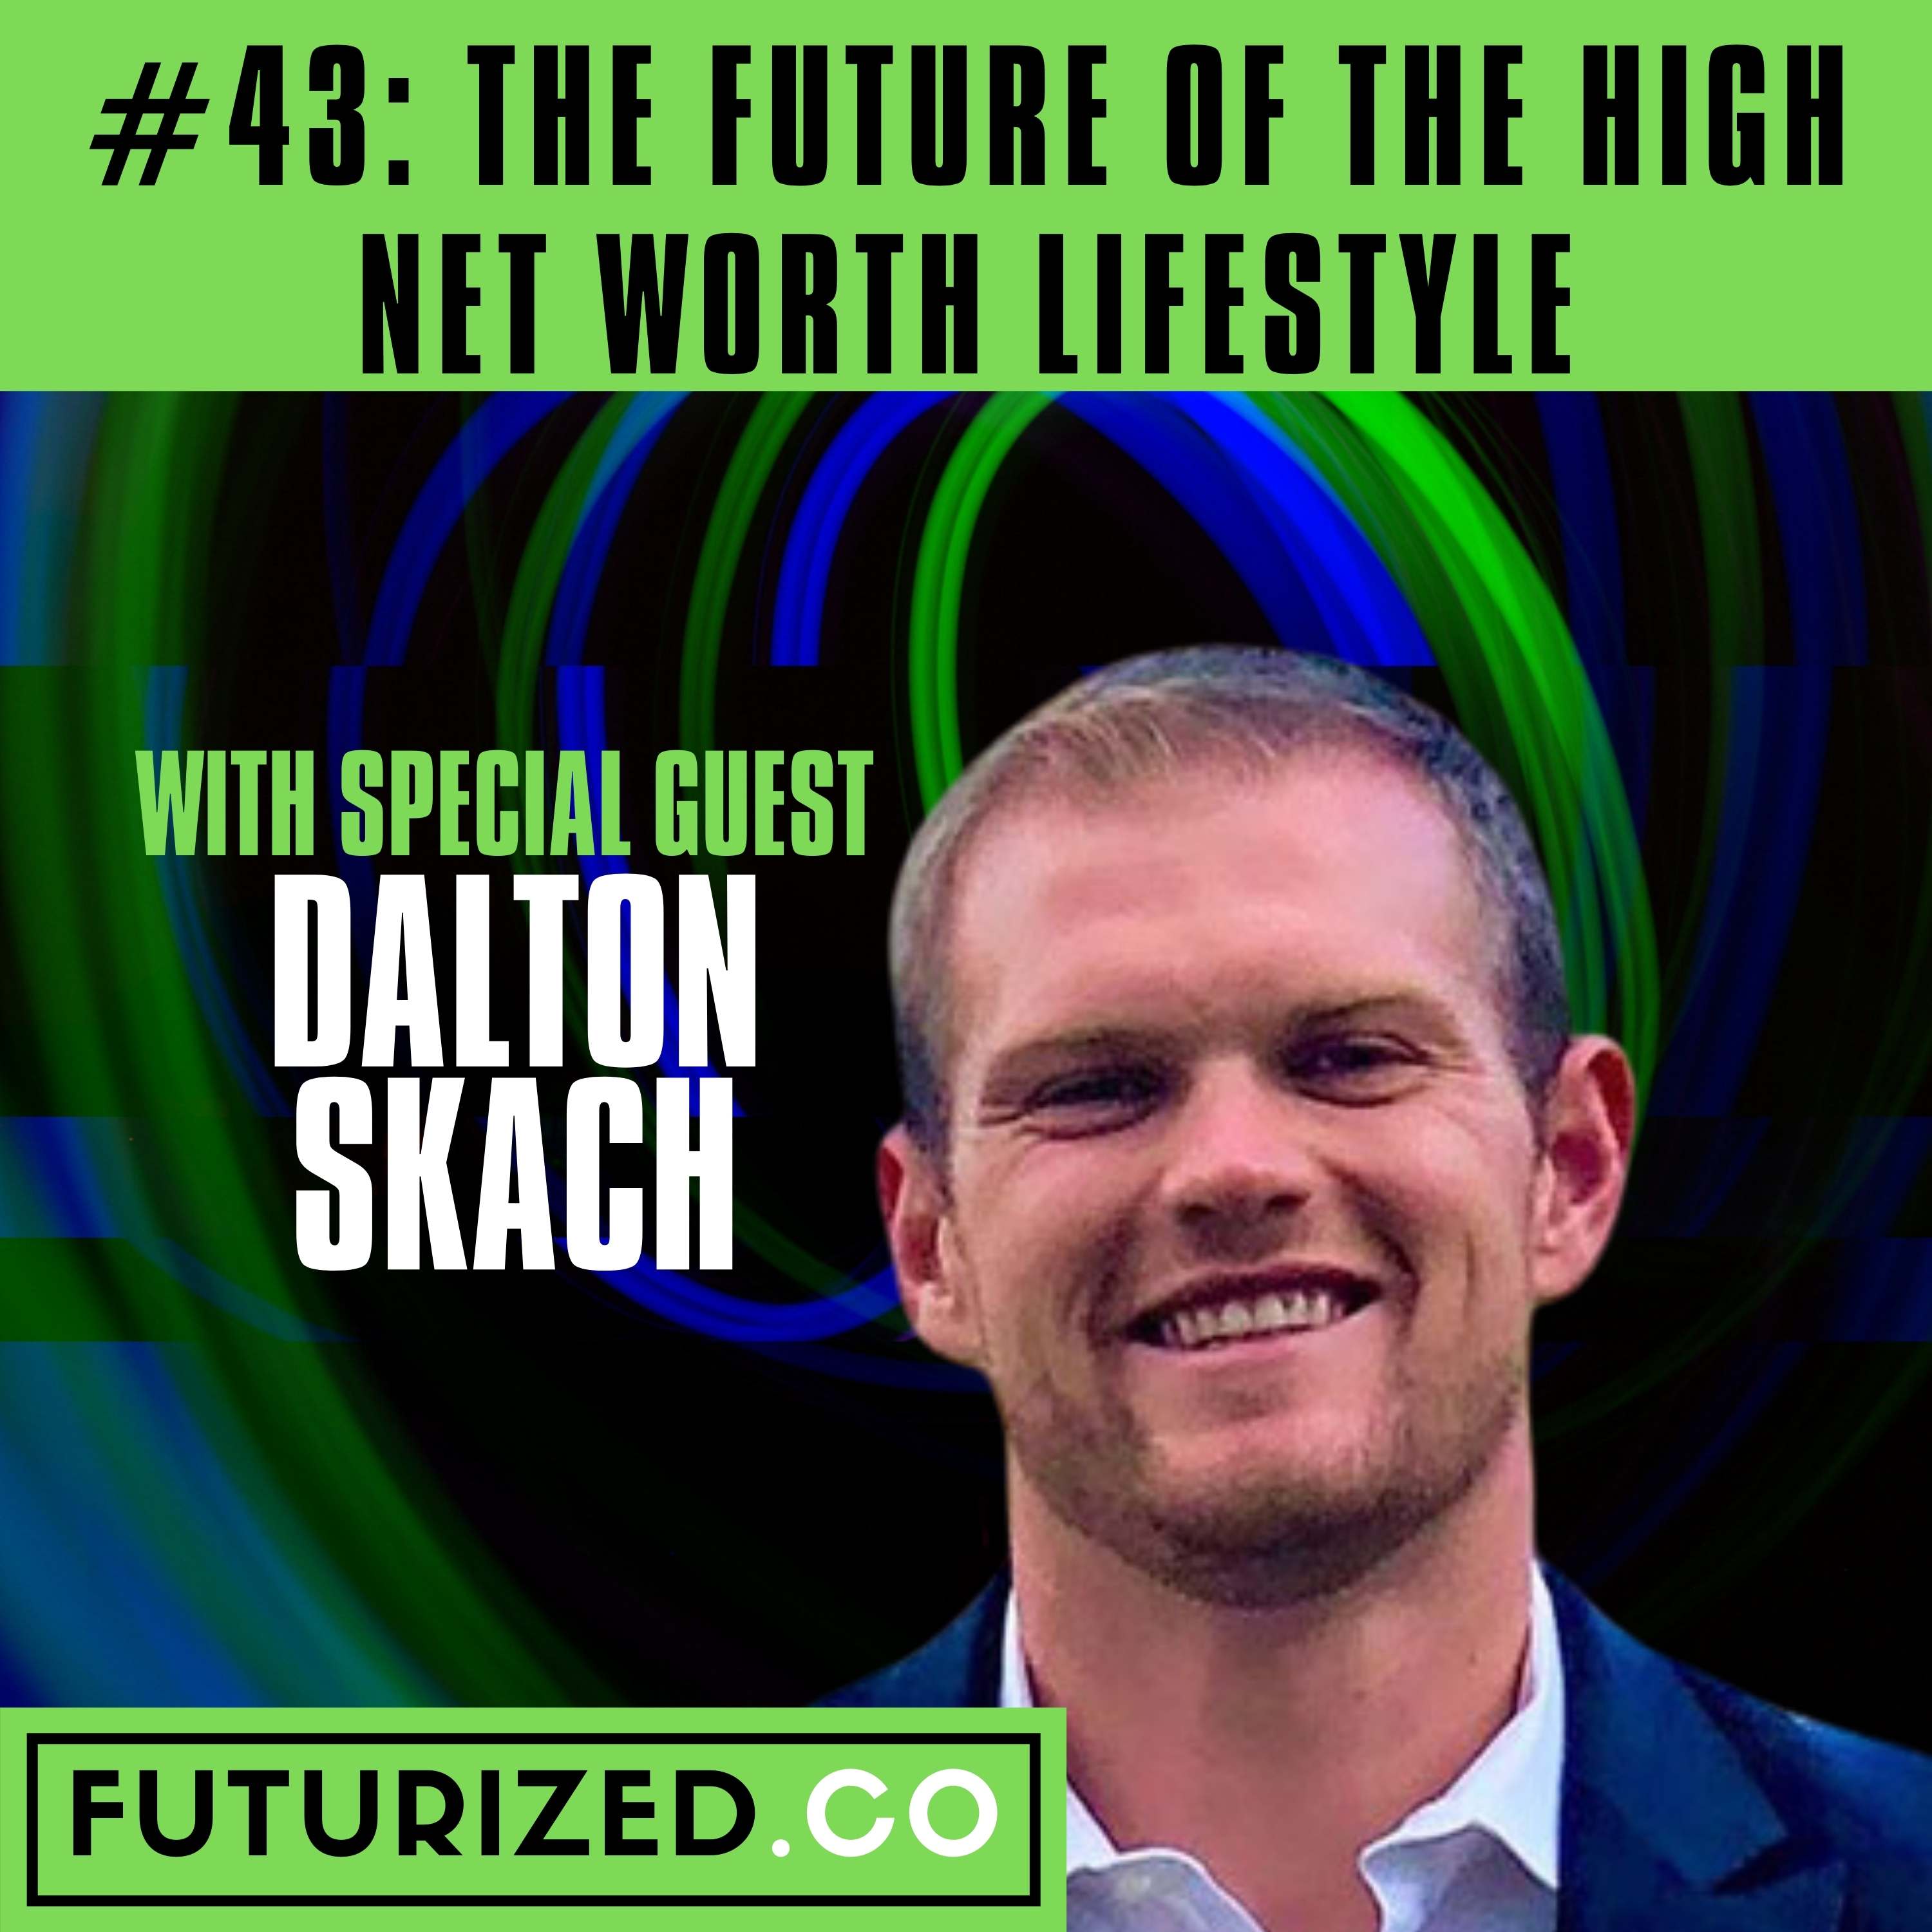 The Future of the High Net Worth Lifestyle Image